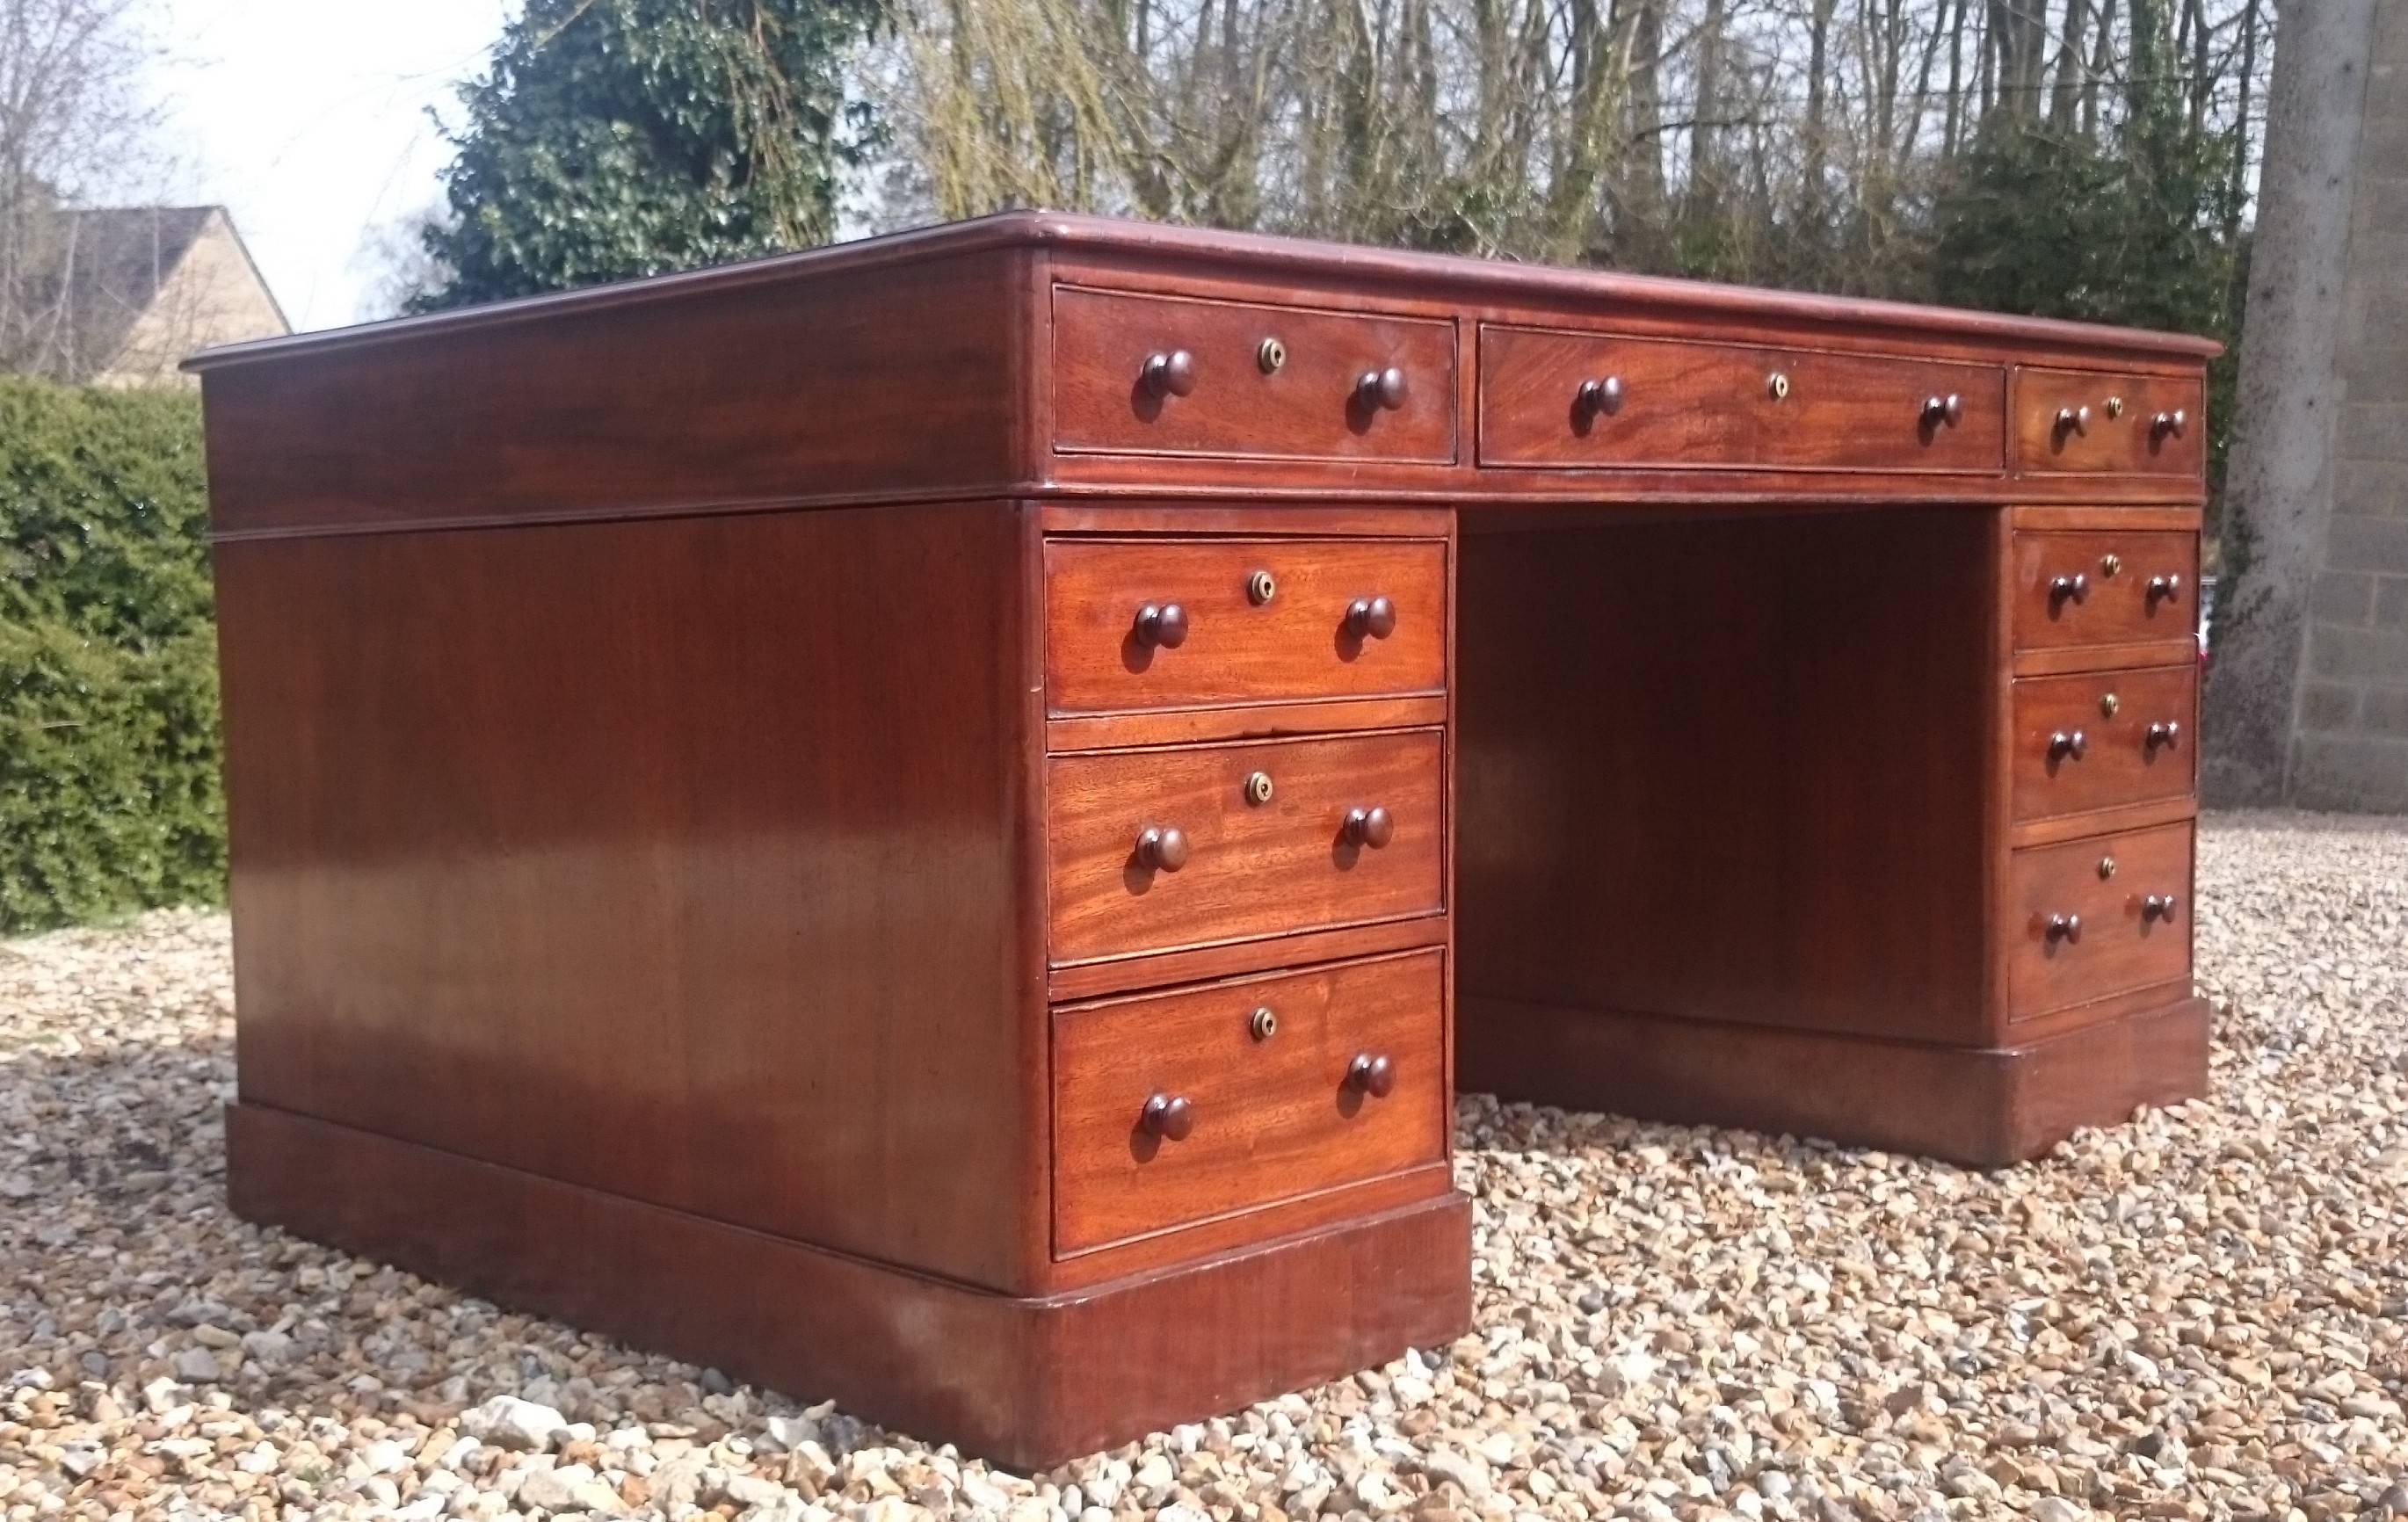 Good large-scale antique partners pedestal desk. This desk has drawers both sides, plenty of knee room and patented warranted locks made by Mordan & Co of Finsbury in London. They look at bit like Brahma locks. The drawers are graduated with the